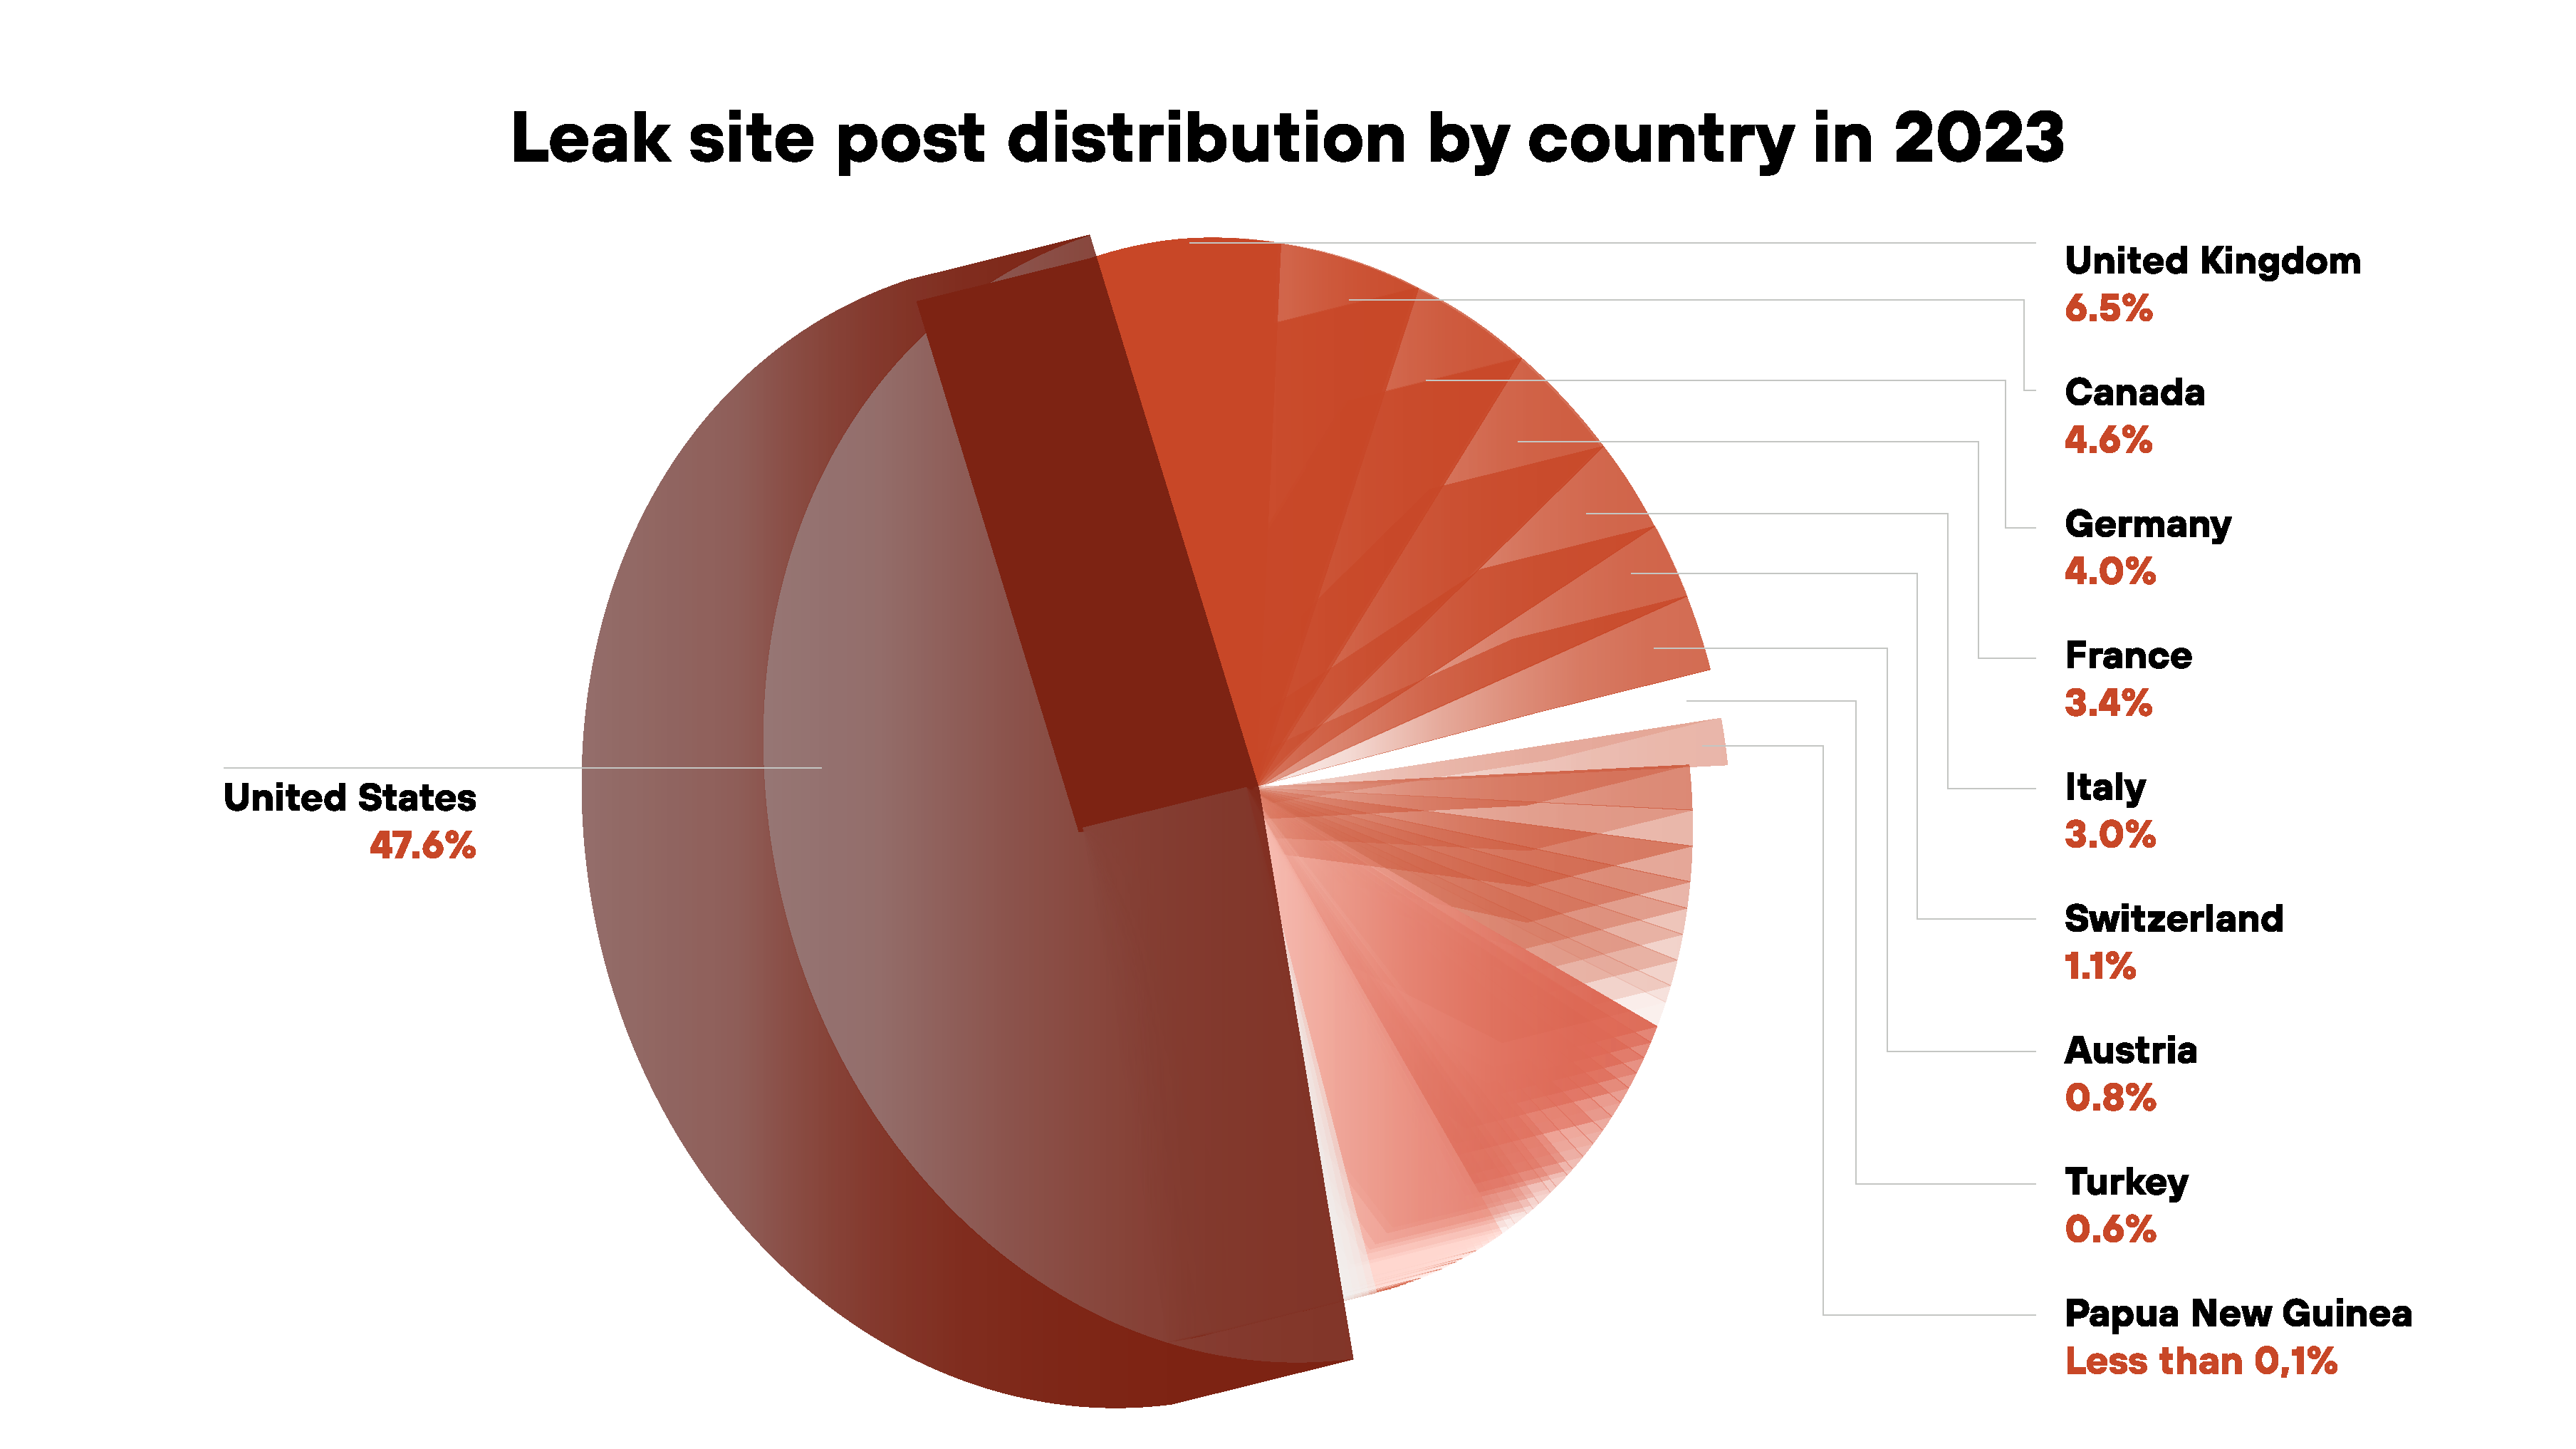 Image 10 is a pie graph of leak site post distribution by country in 2023. The majority is the United States at 47.6%, followed by the UK at 6.5%, Canada at 4.6%, Germany at 4%, and France at 3.4%.